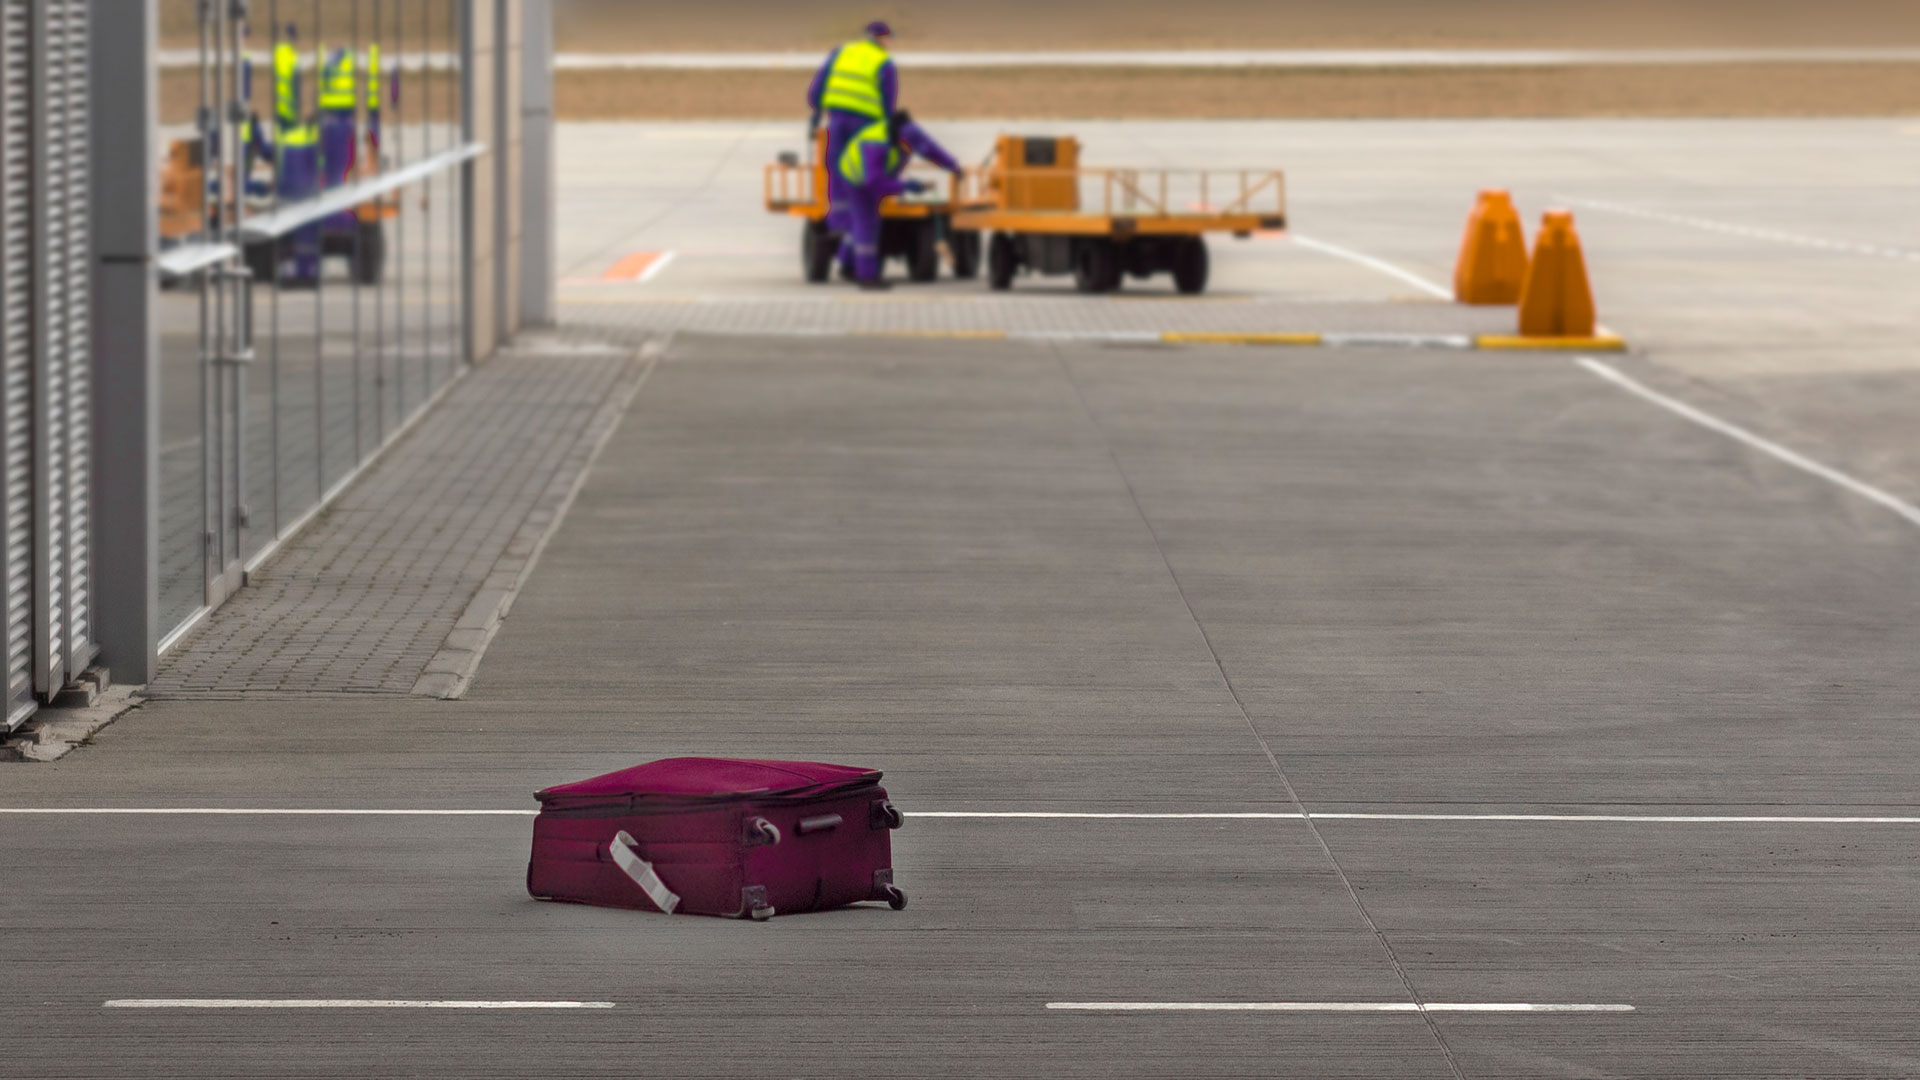 Lost suitcase lying on the tarmac of an airport runway.